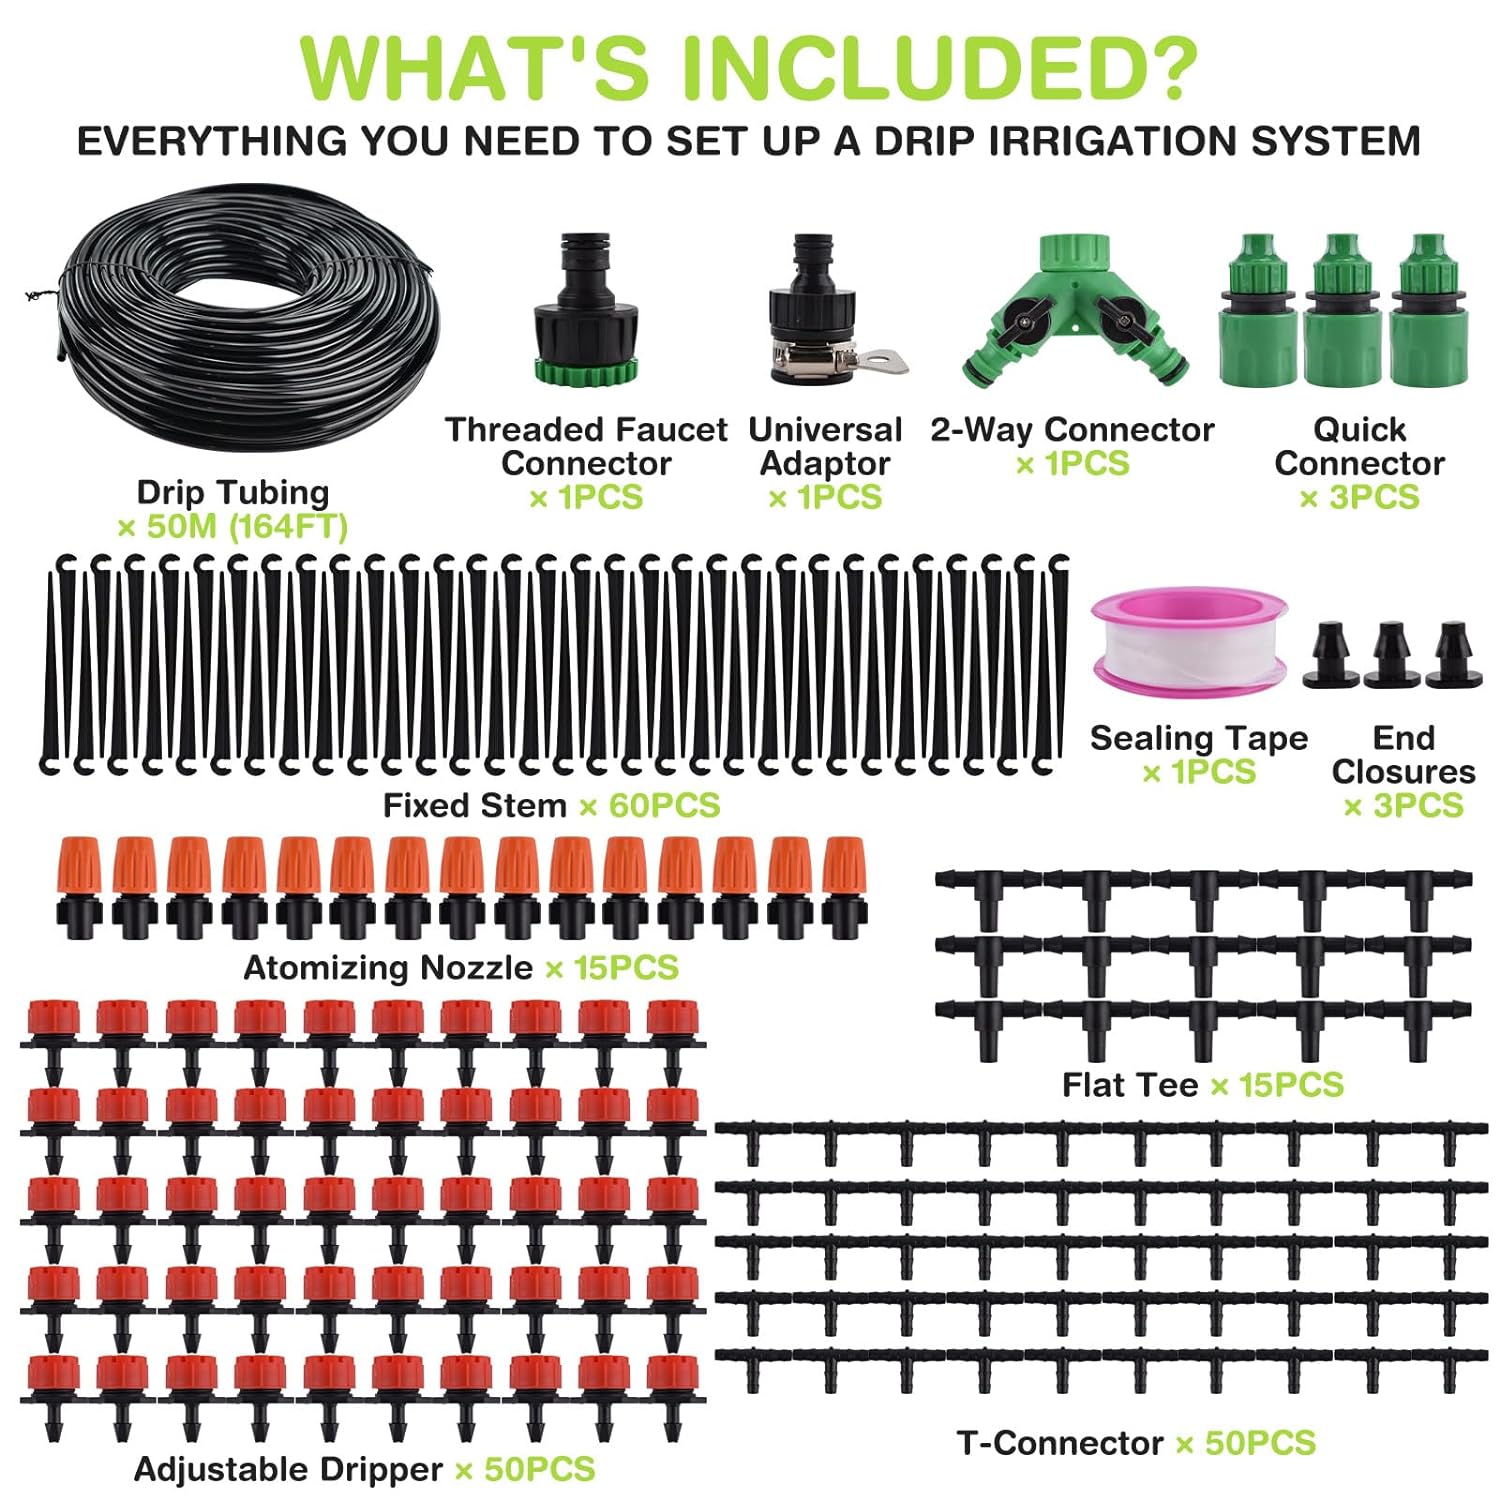 Micro Drip Irrigation Kit, 164FT Automatic Irrigation System, Watering Irrigation Equipment with 1/4 Blank Distribution Tubing Hose Adjustable Nozzle, Misting Plant Watering System for Greenhouse